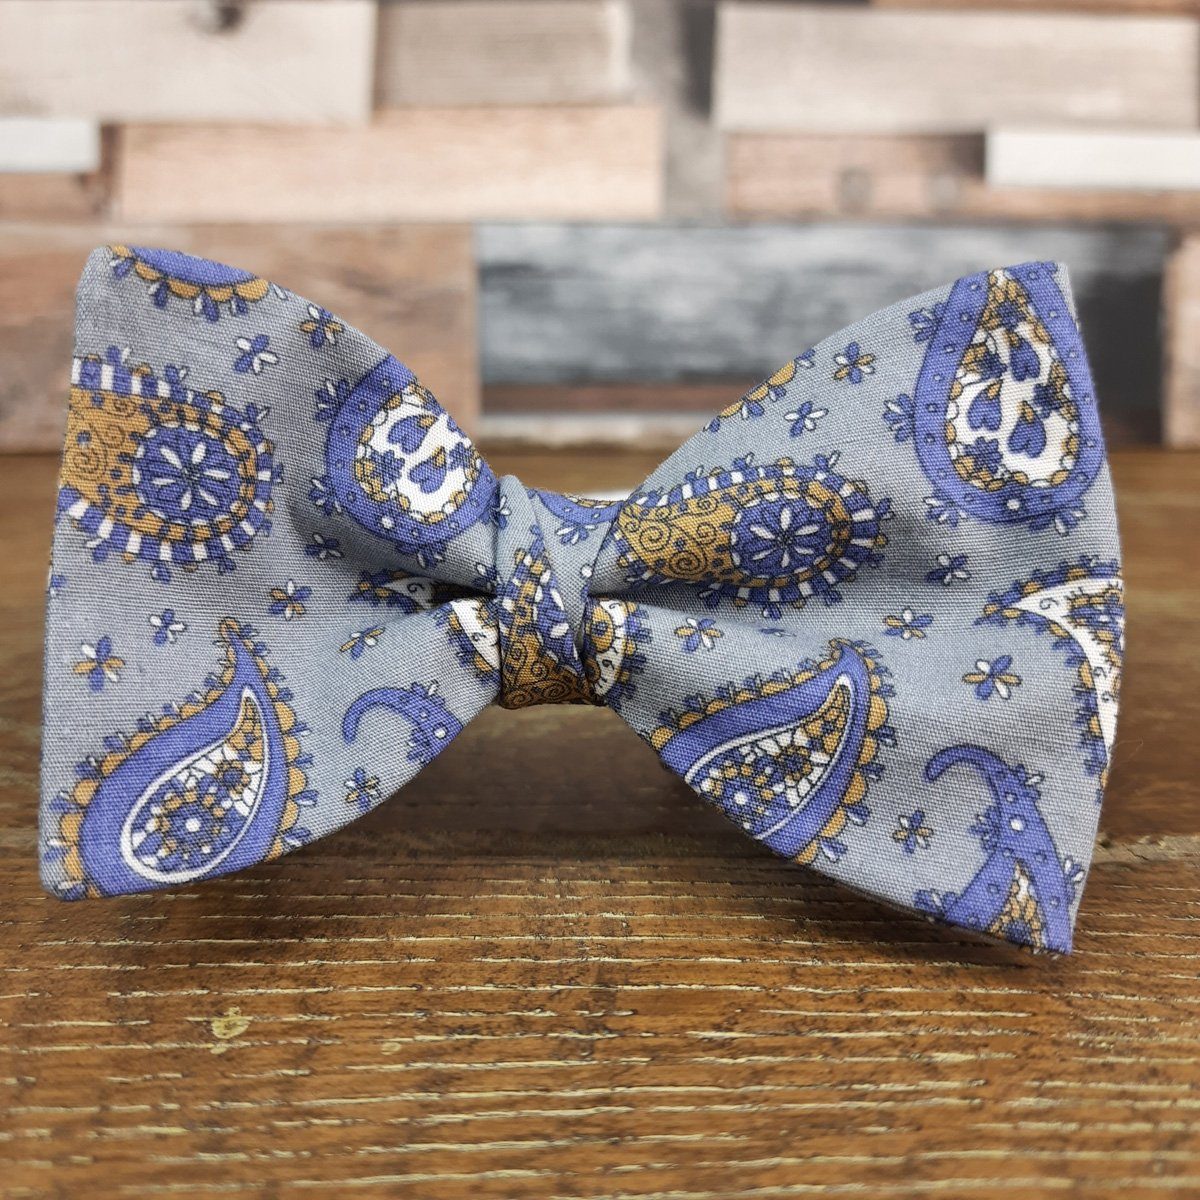 Blue & Gold Daisy Paisley Cotton Ready-Tied Bow Tie - Bow Ties - - THREADPEPPER